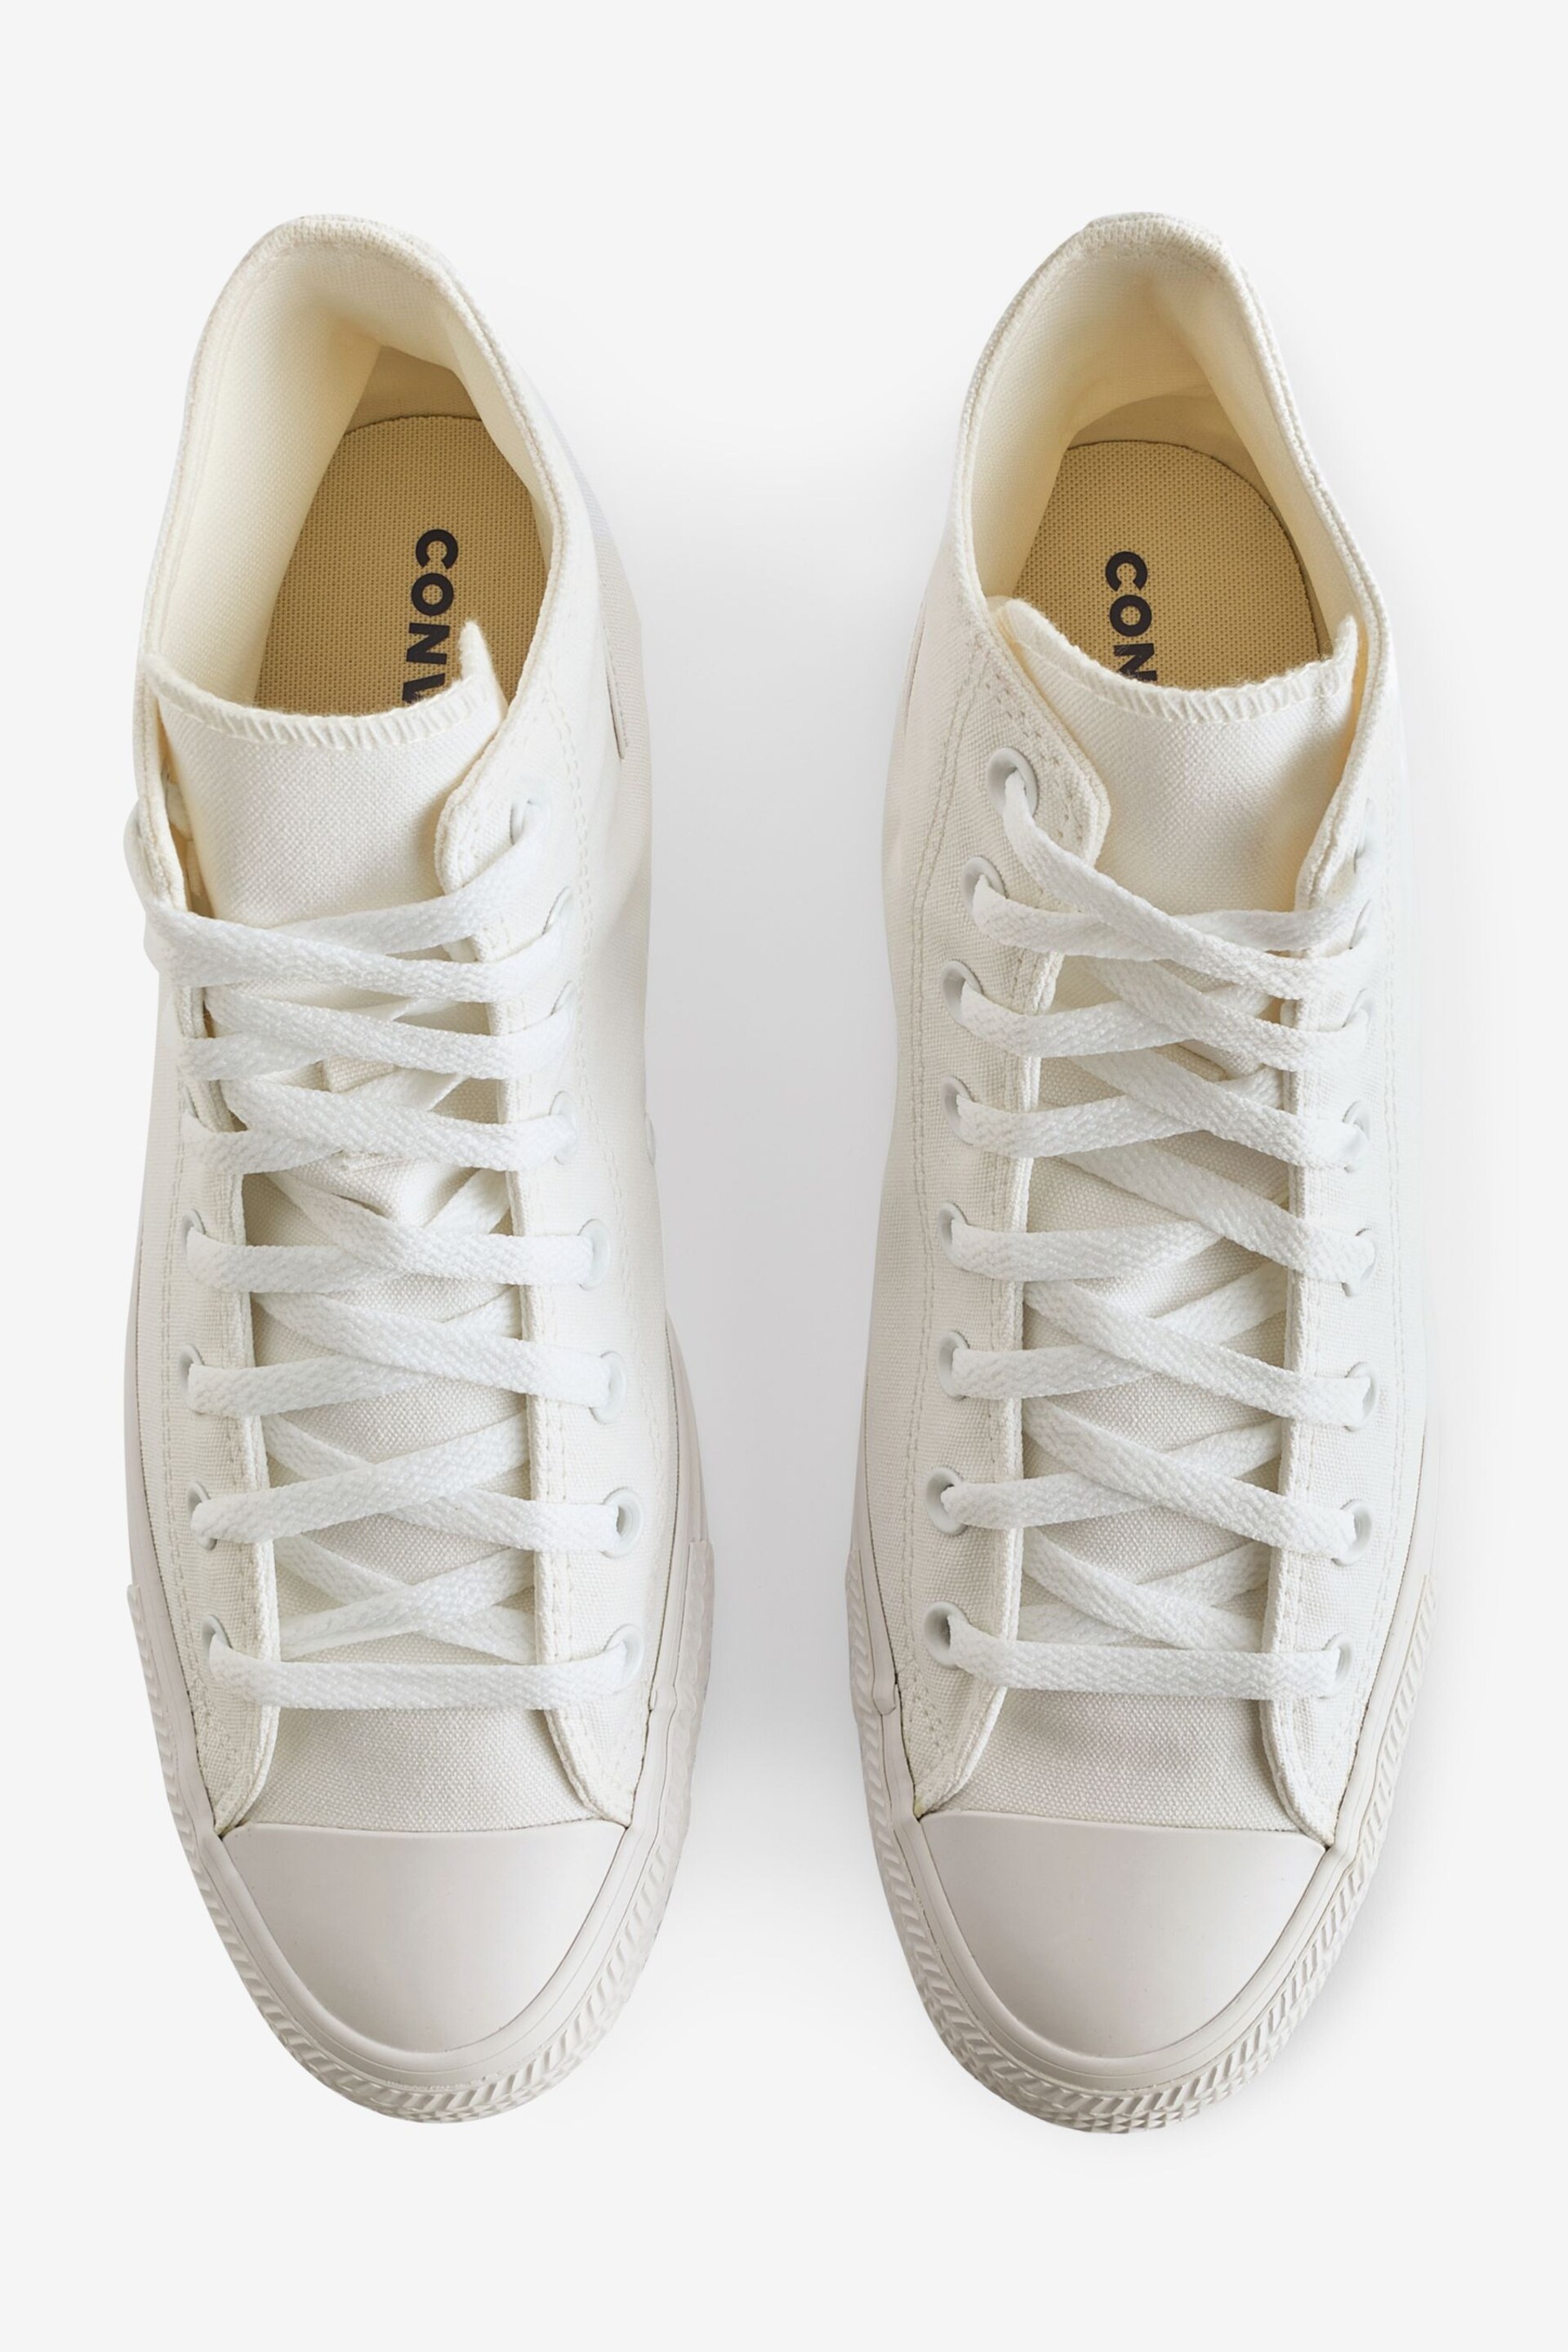 Converse White Chuck High Trainers - Image 5 of 9